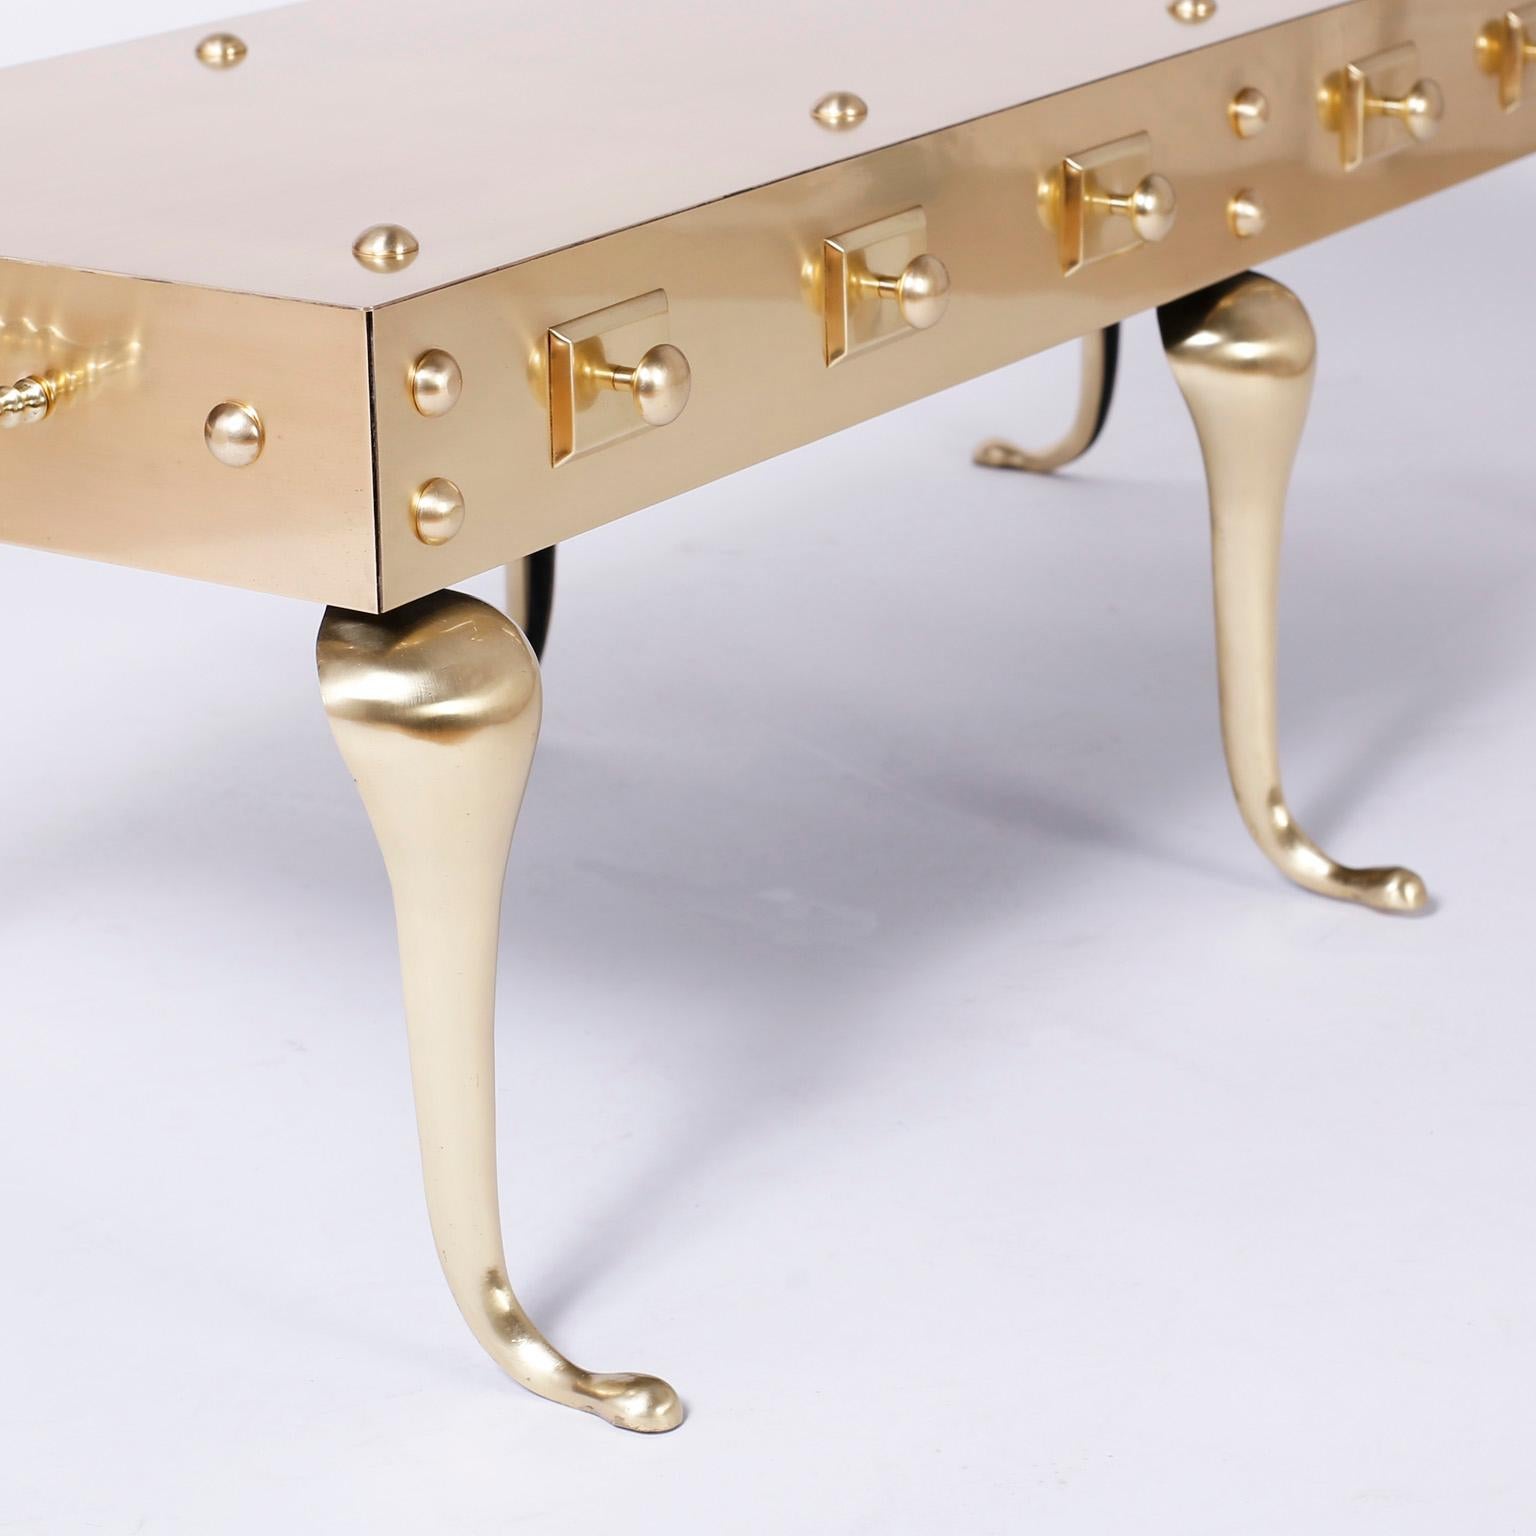 English Midcentury Six Legged Brass Coffee or Cocktail Table For Sale